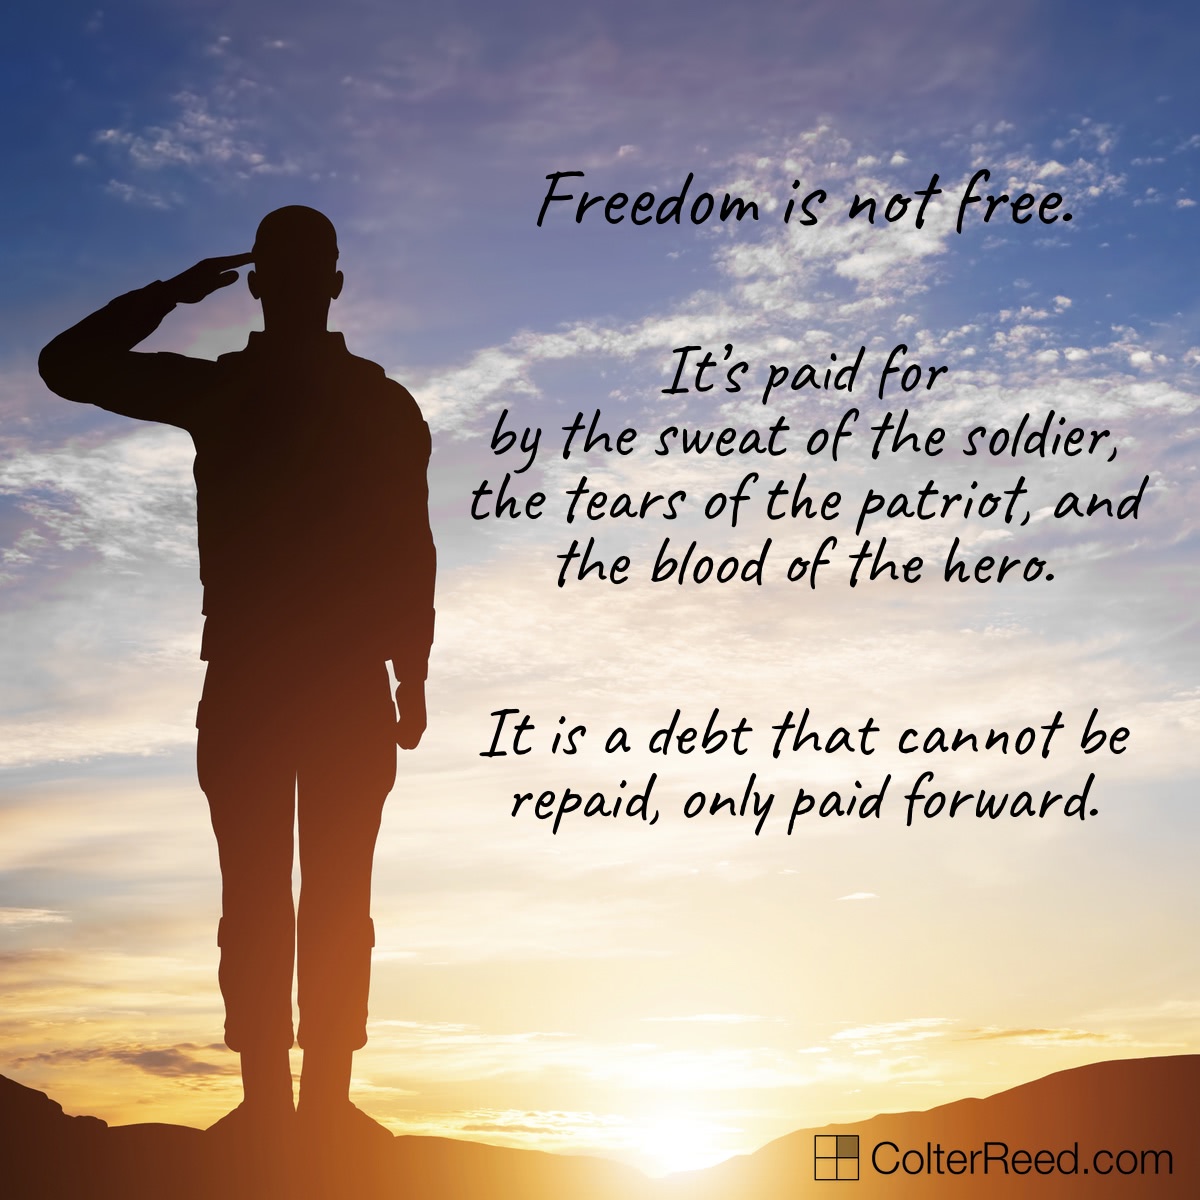 Freedom is not free. It is a debt that cannot be repaid, only paid forward.